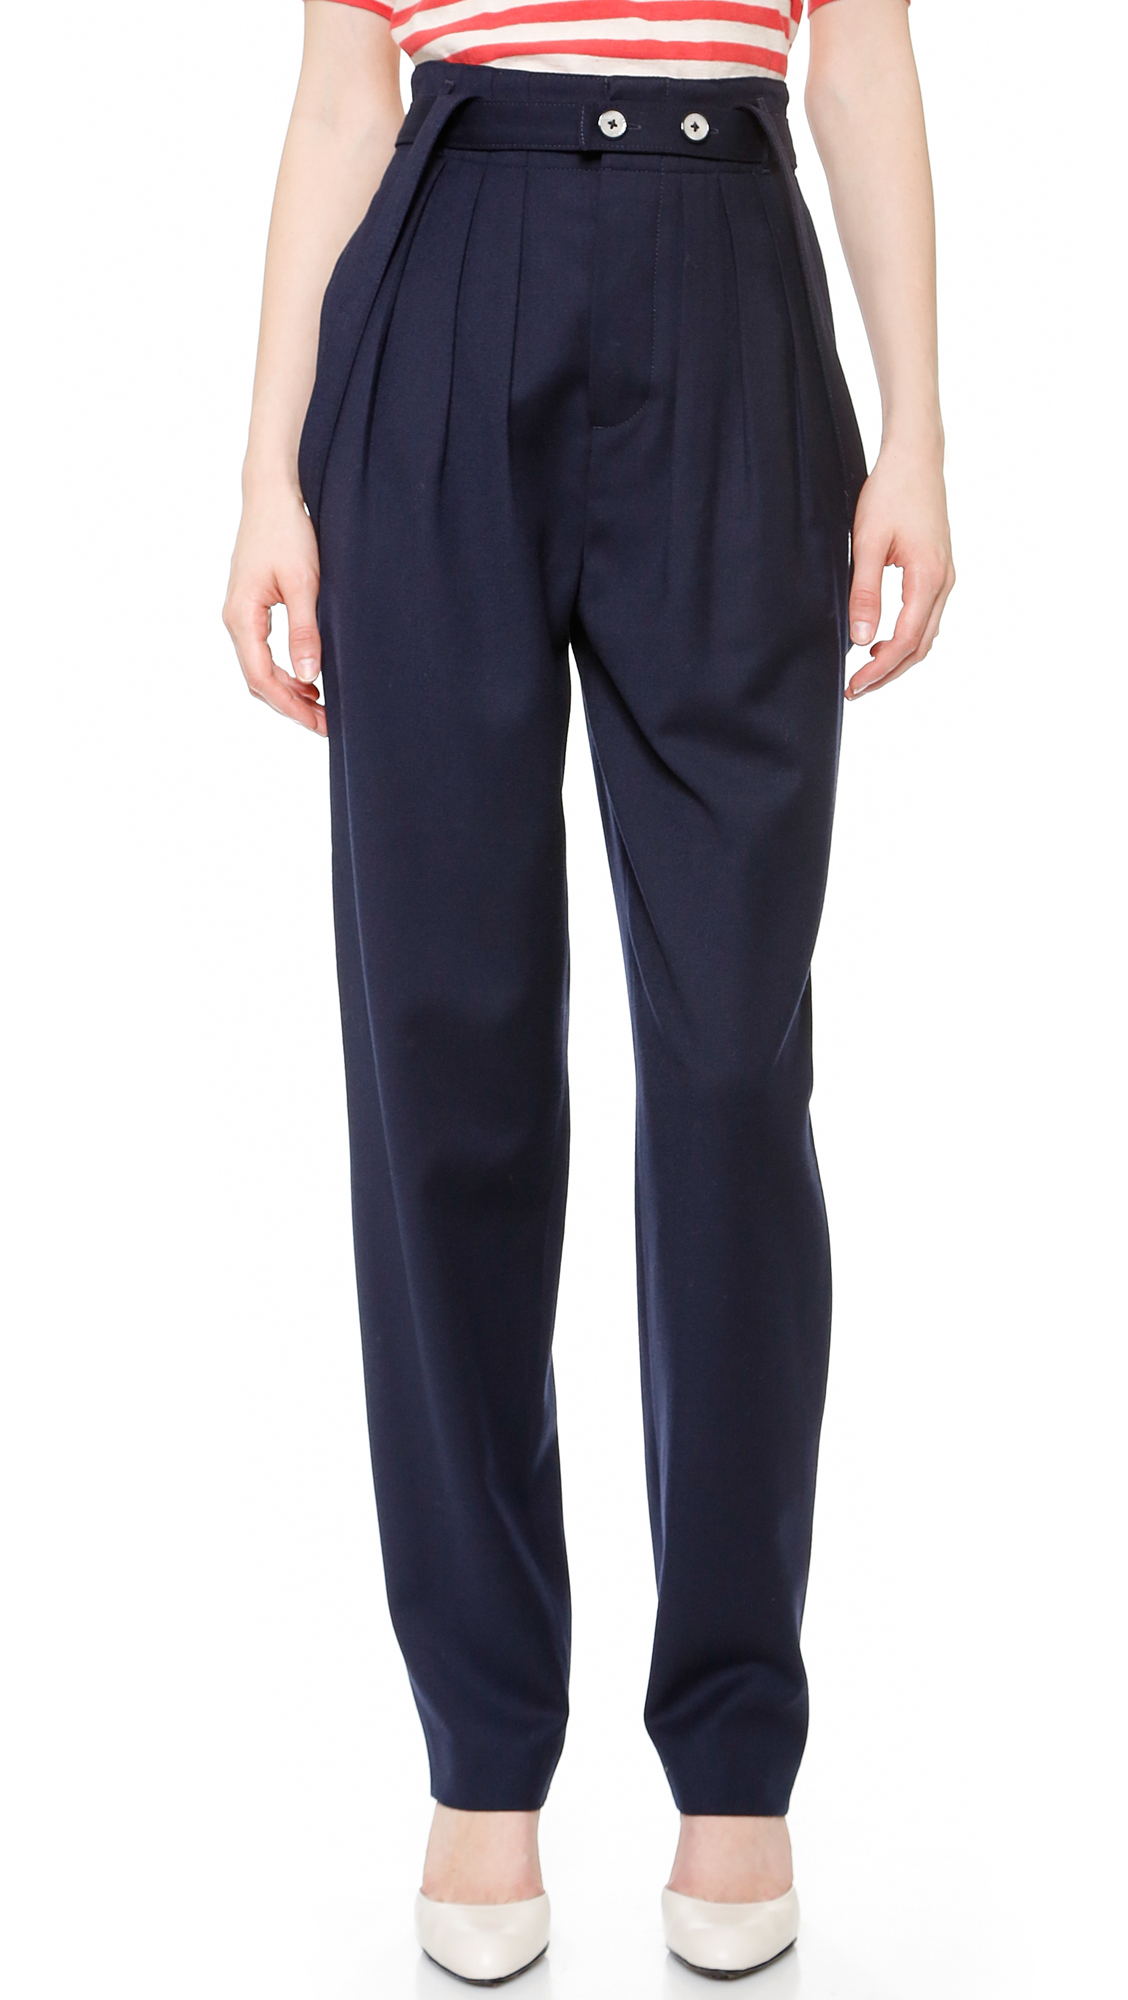 Marc by marc jacobs Junko Pants With Suspenders - Normandy Blue in Blue ...